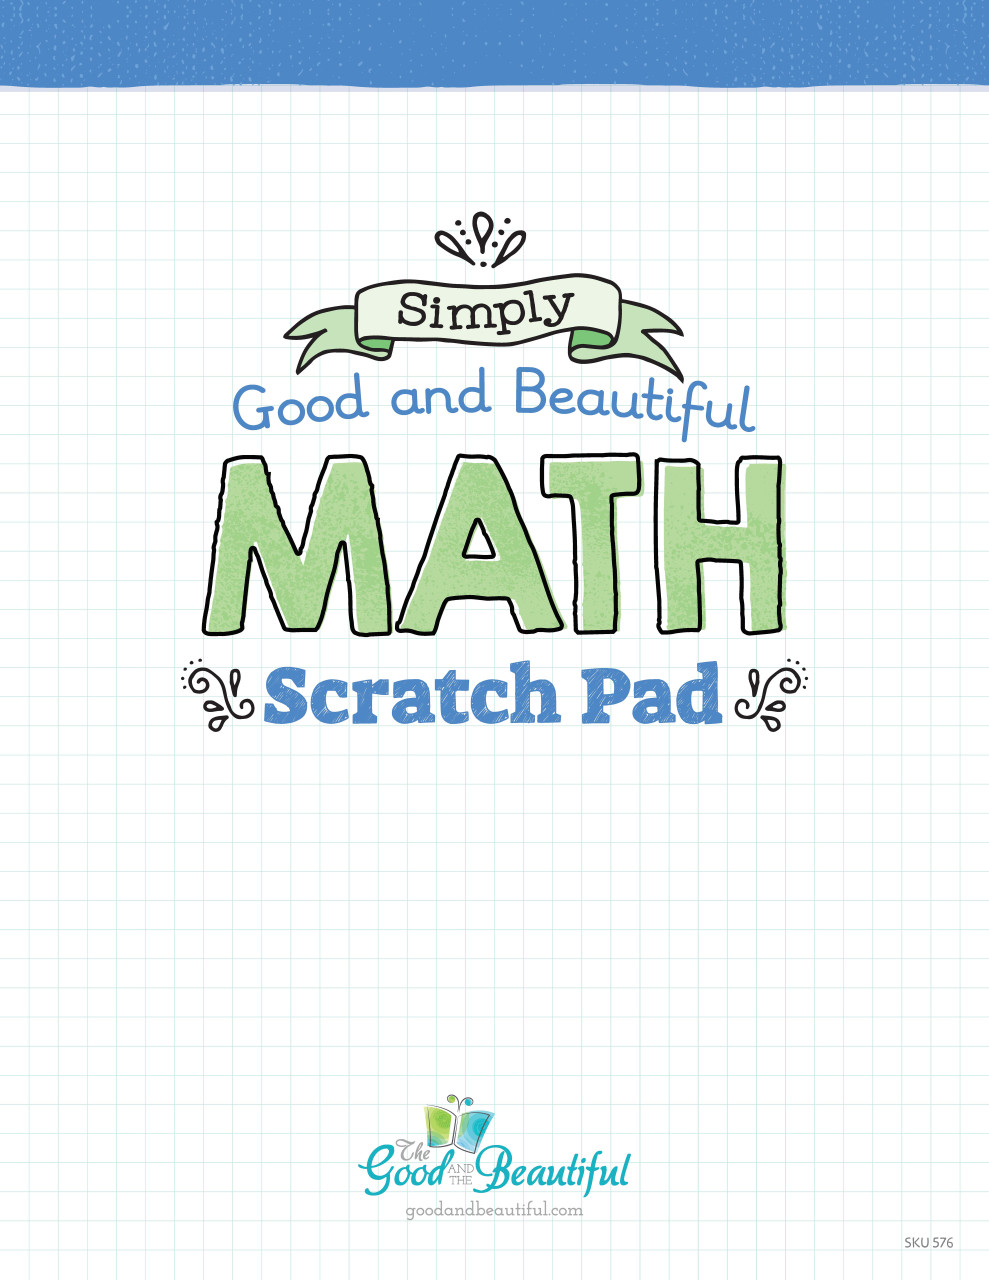 Math Scratch Pad - The Good and the Beautiful